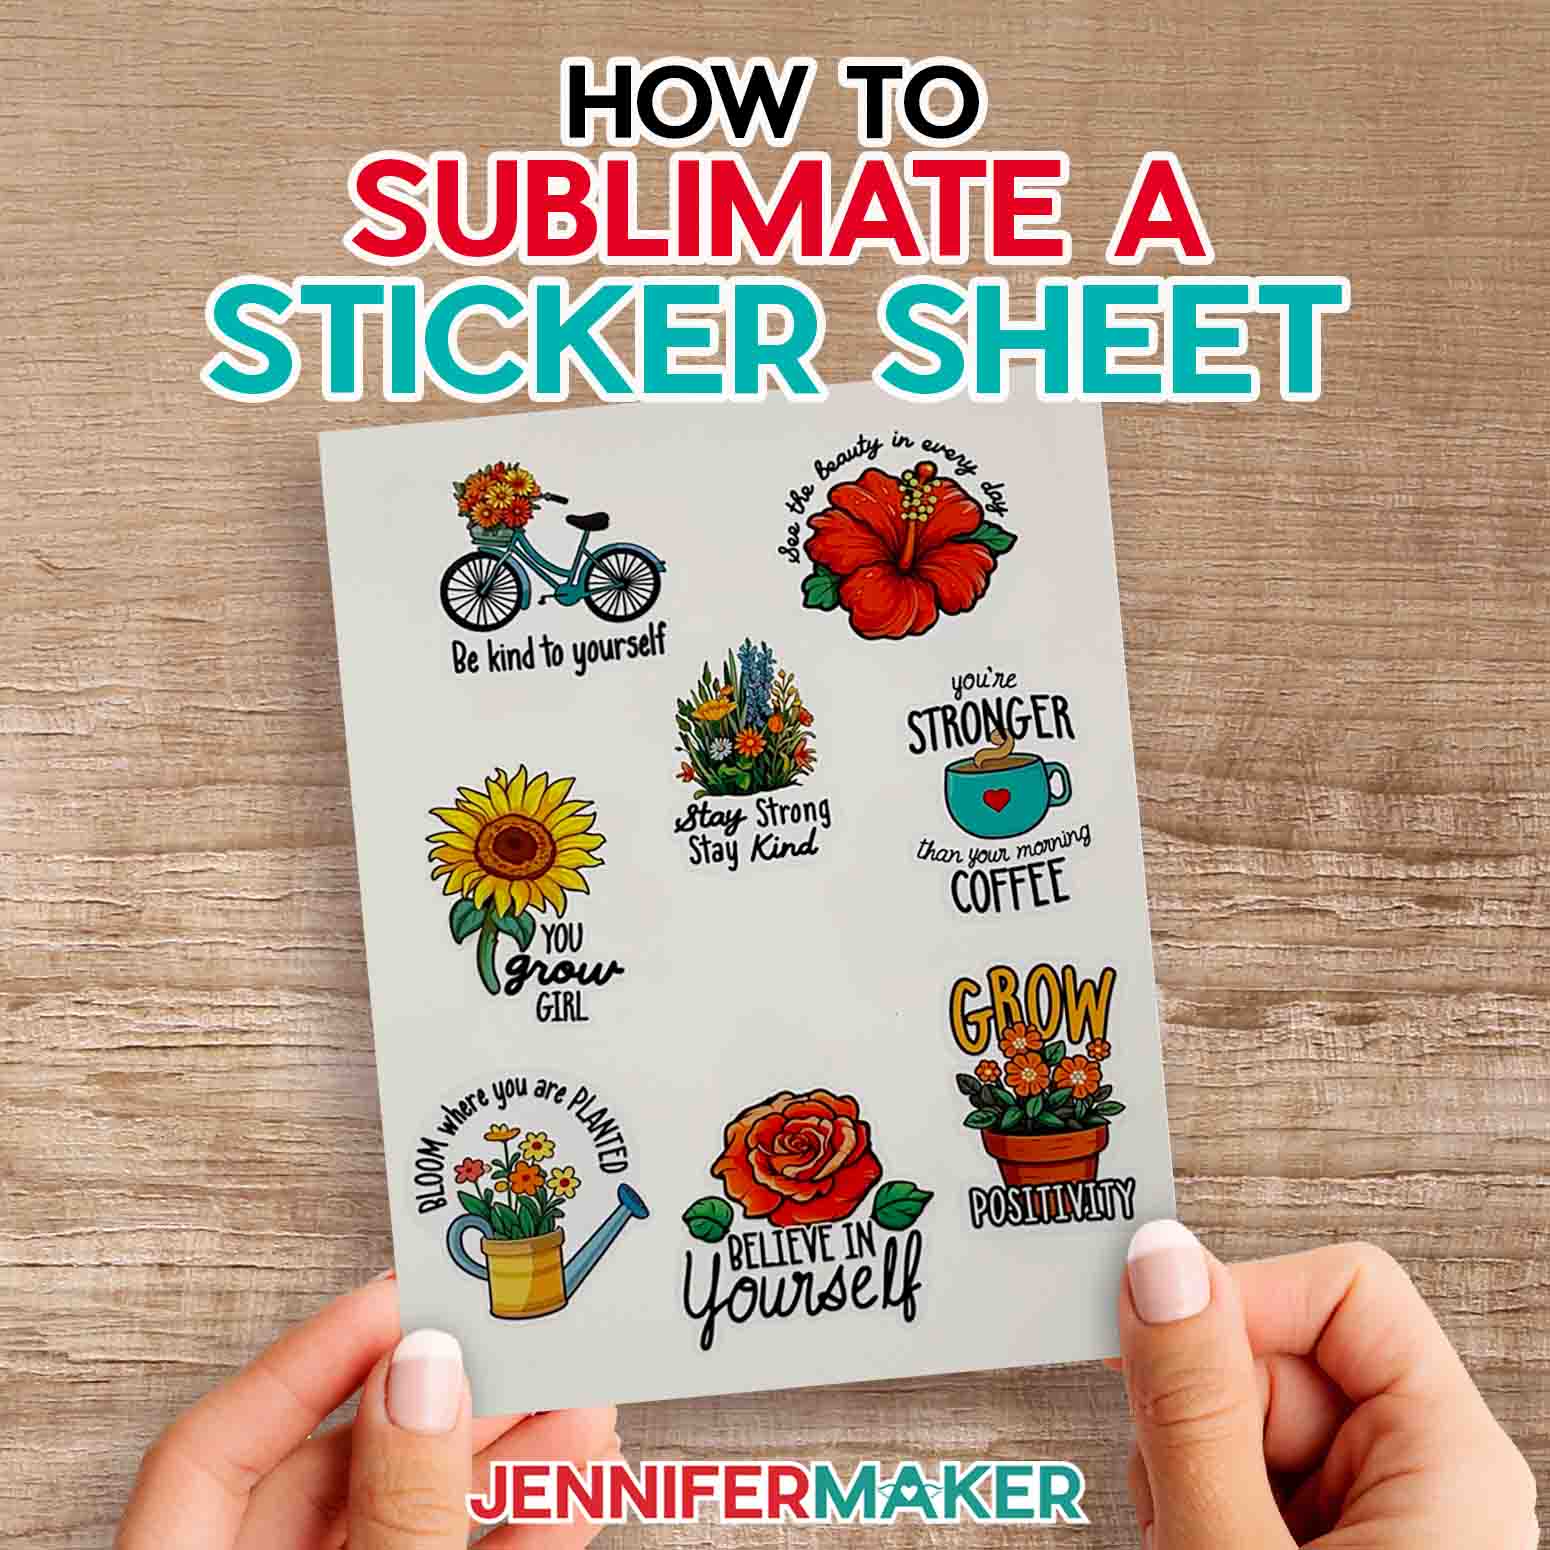 Learn how to sublimate a sticker sheet with JenniferMaker's tutorial! Jennifer holds a sheet of sublimated stickers over a wooden table. The stickers are brightly colored, and flower and garden themed, with inspiring messages like "Believe In Yourself," Stay Strong, Stay Kind," and "Grow Positivity."